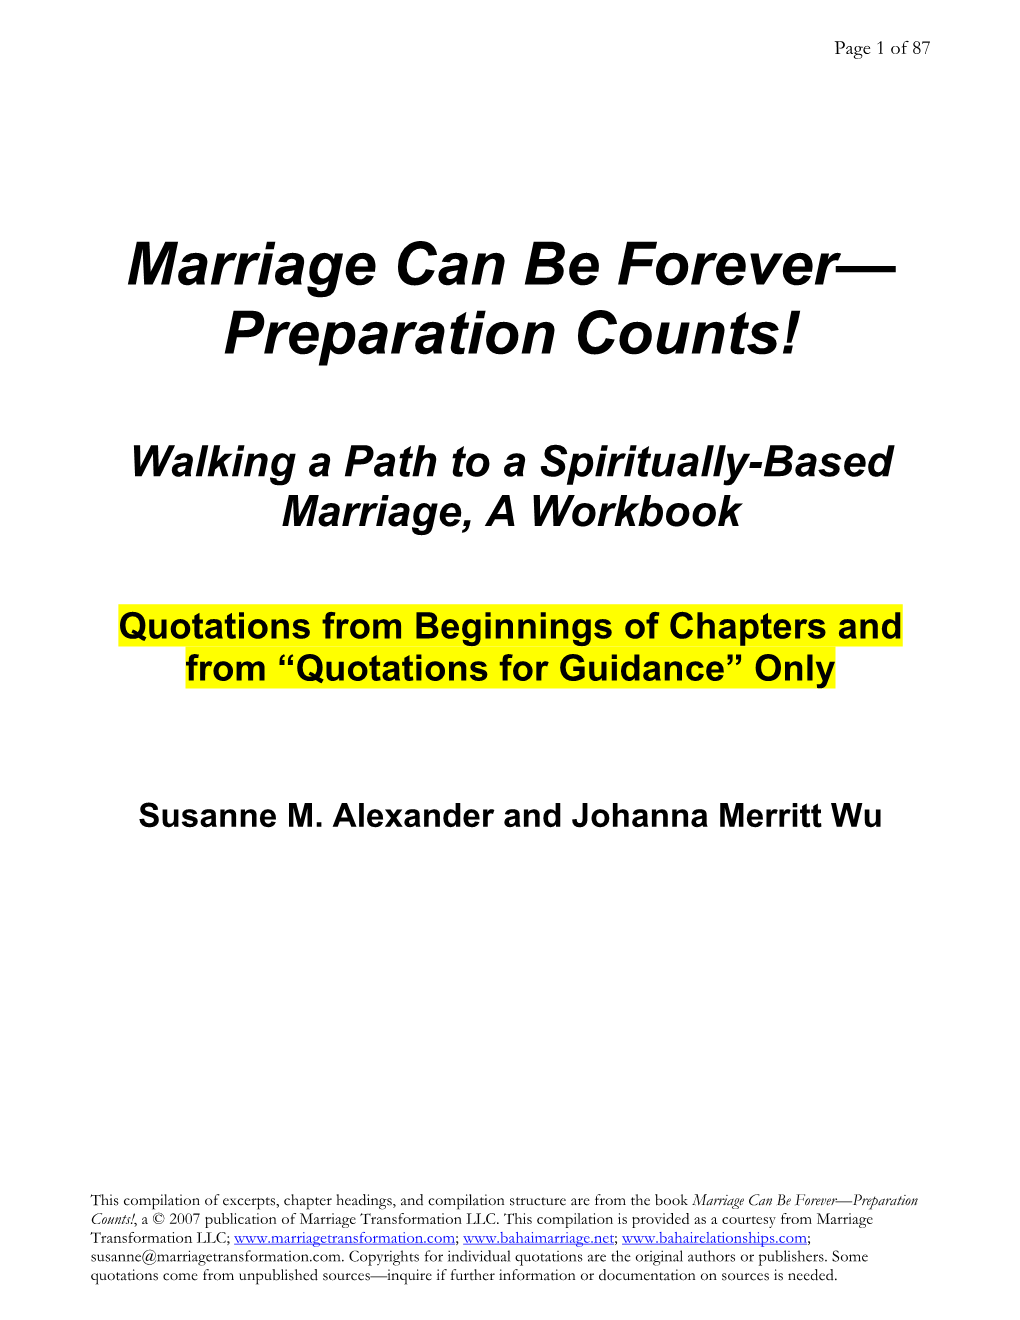 Compilation of Quotations from Marriage Can Be Forever